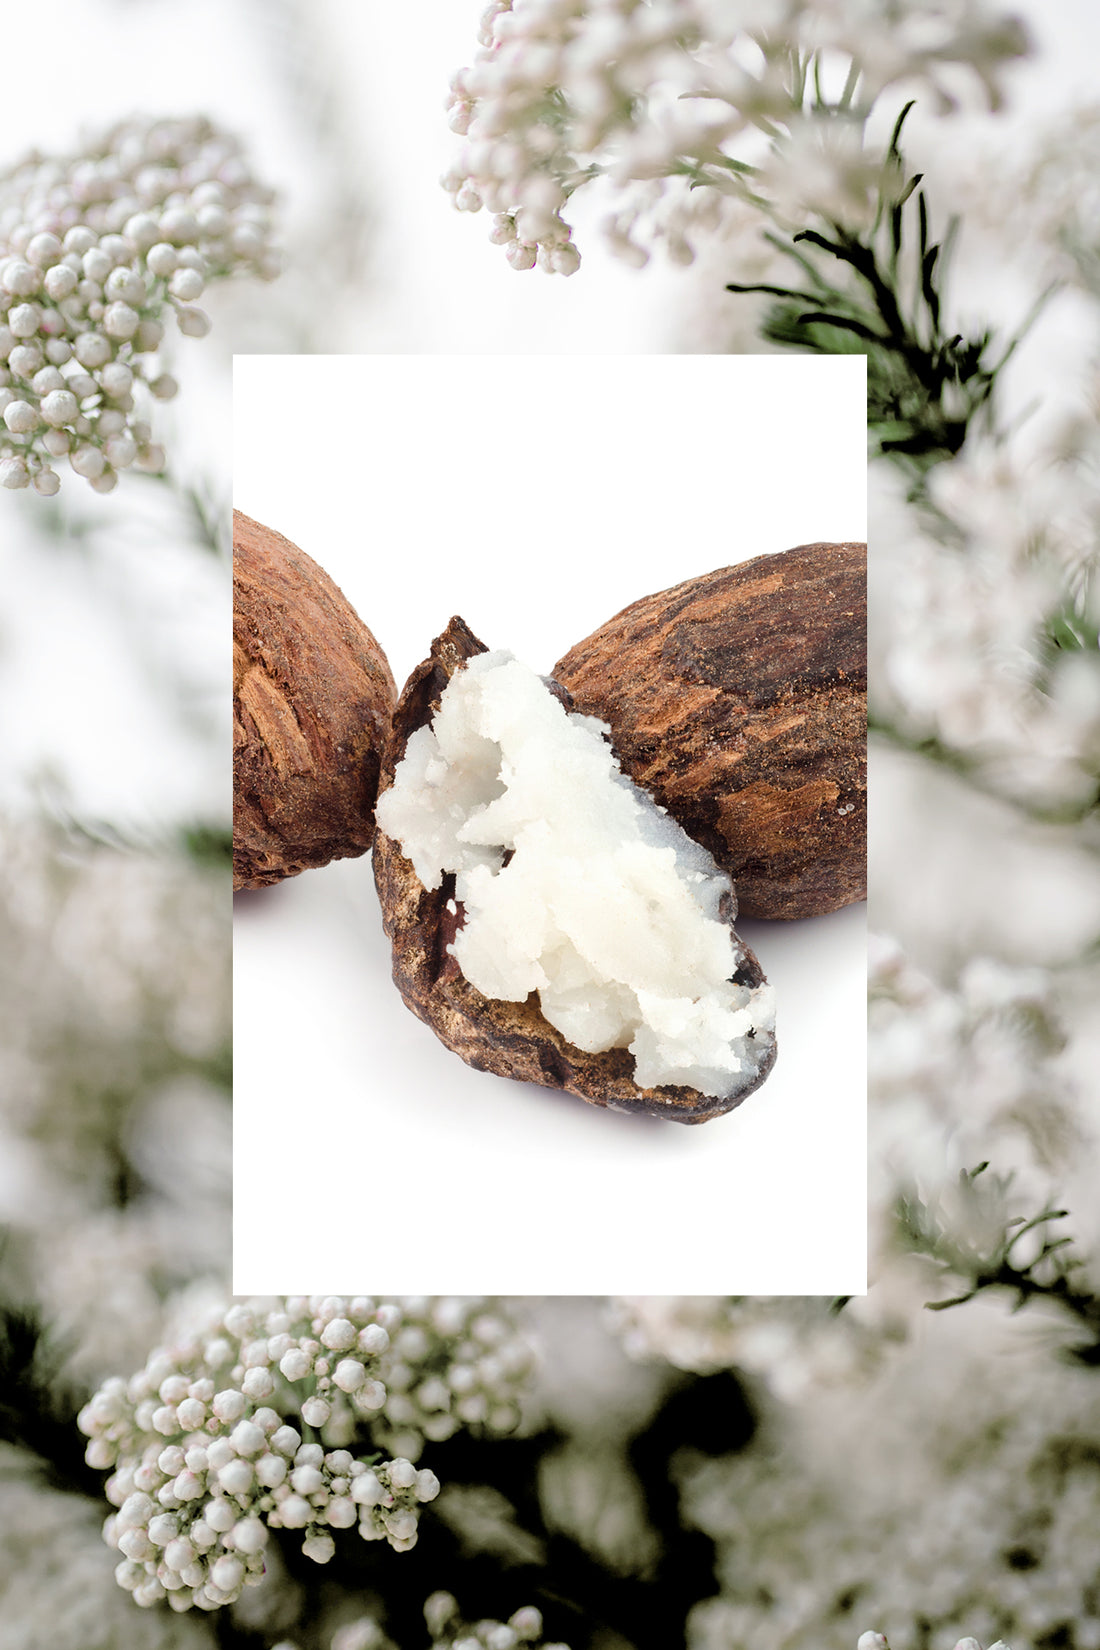 ingredient image of shea and rice flower